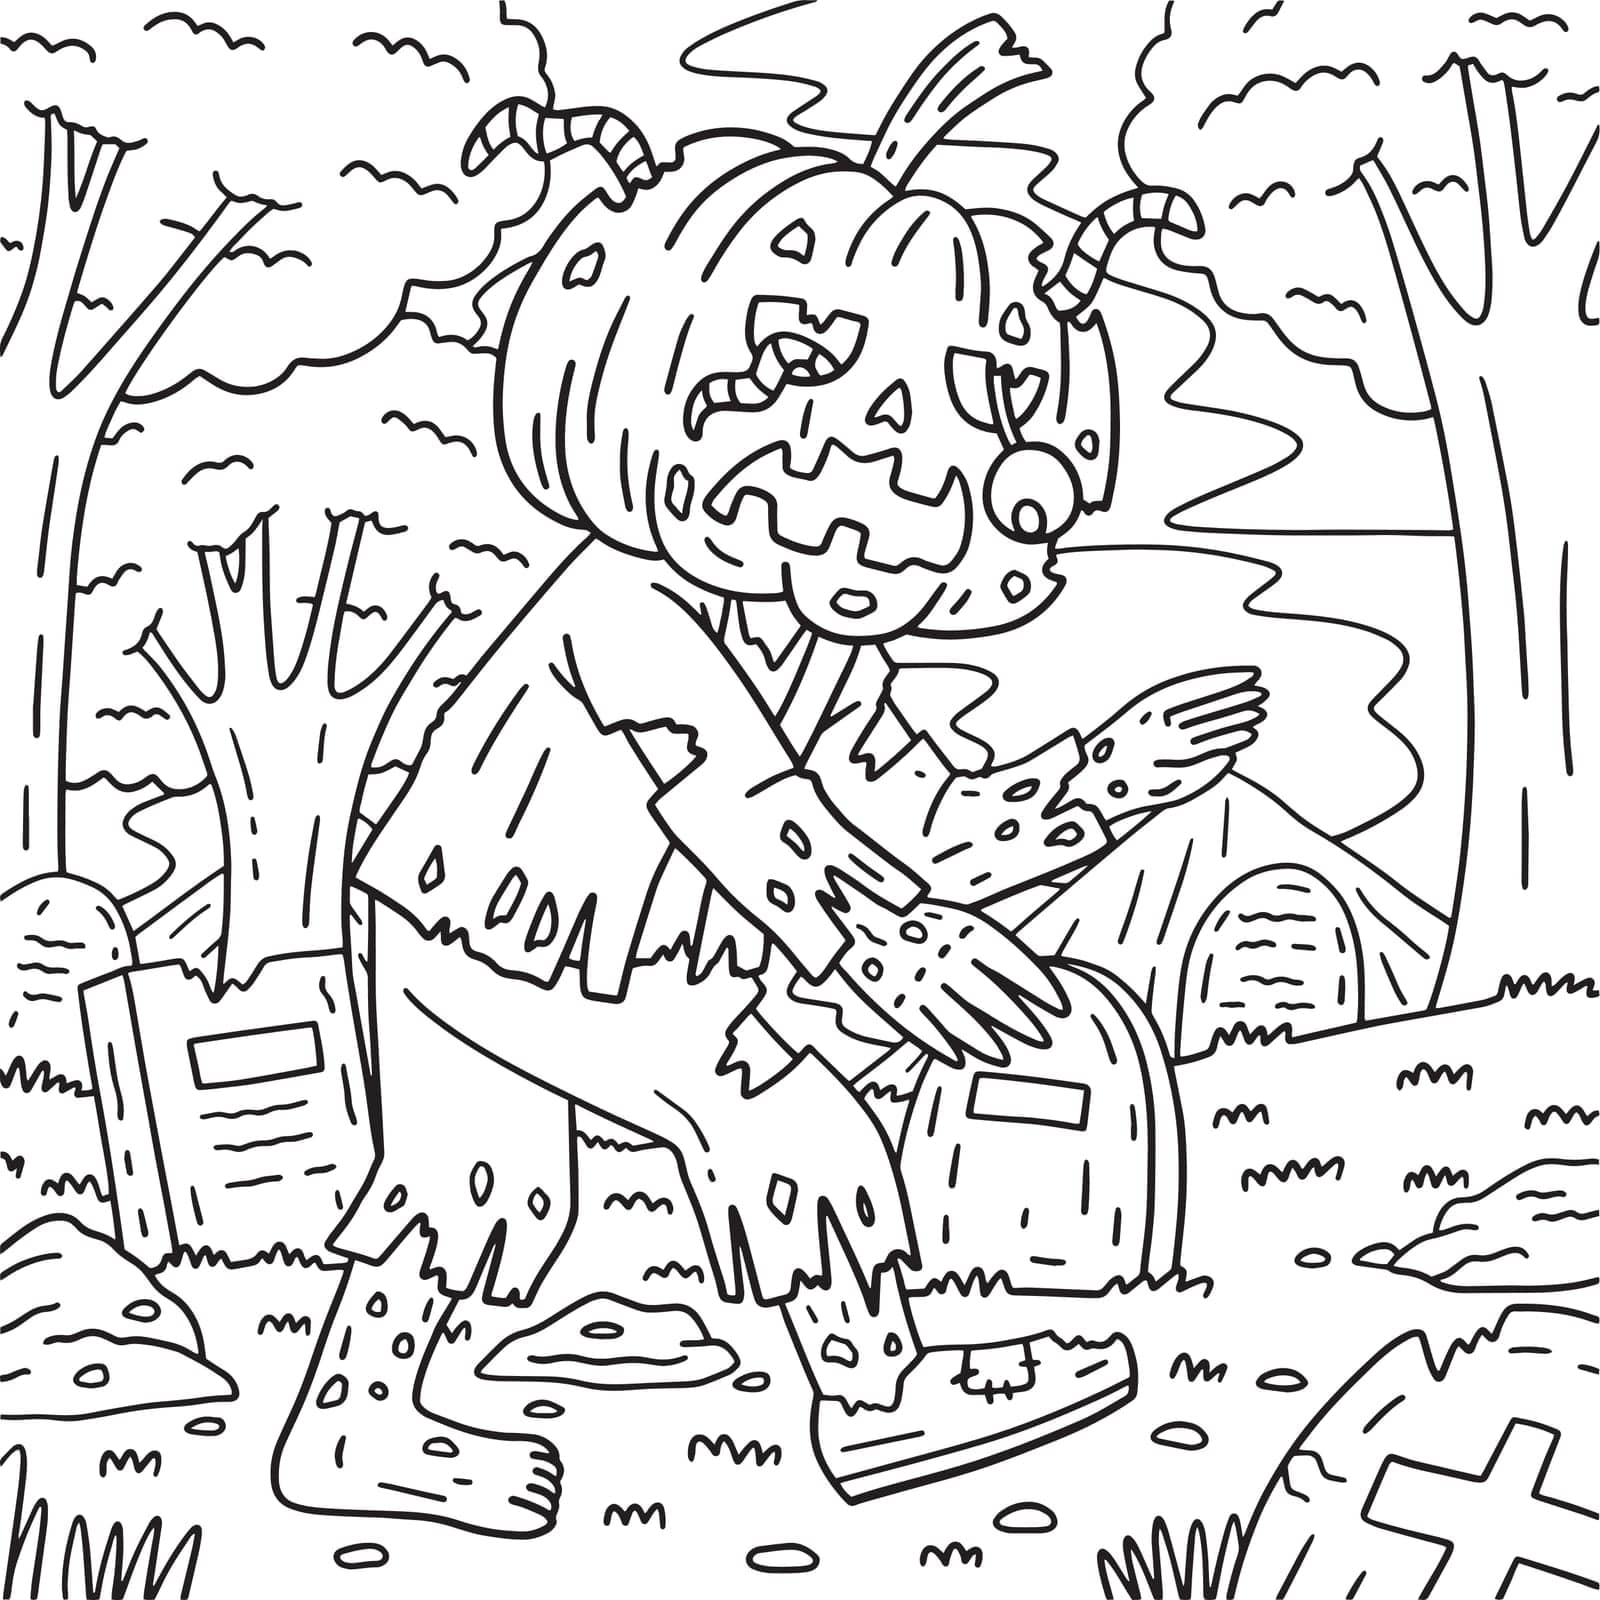 Zombie in a Pumpkin Head Coloring Pages for Kids by abbydesign